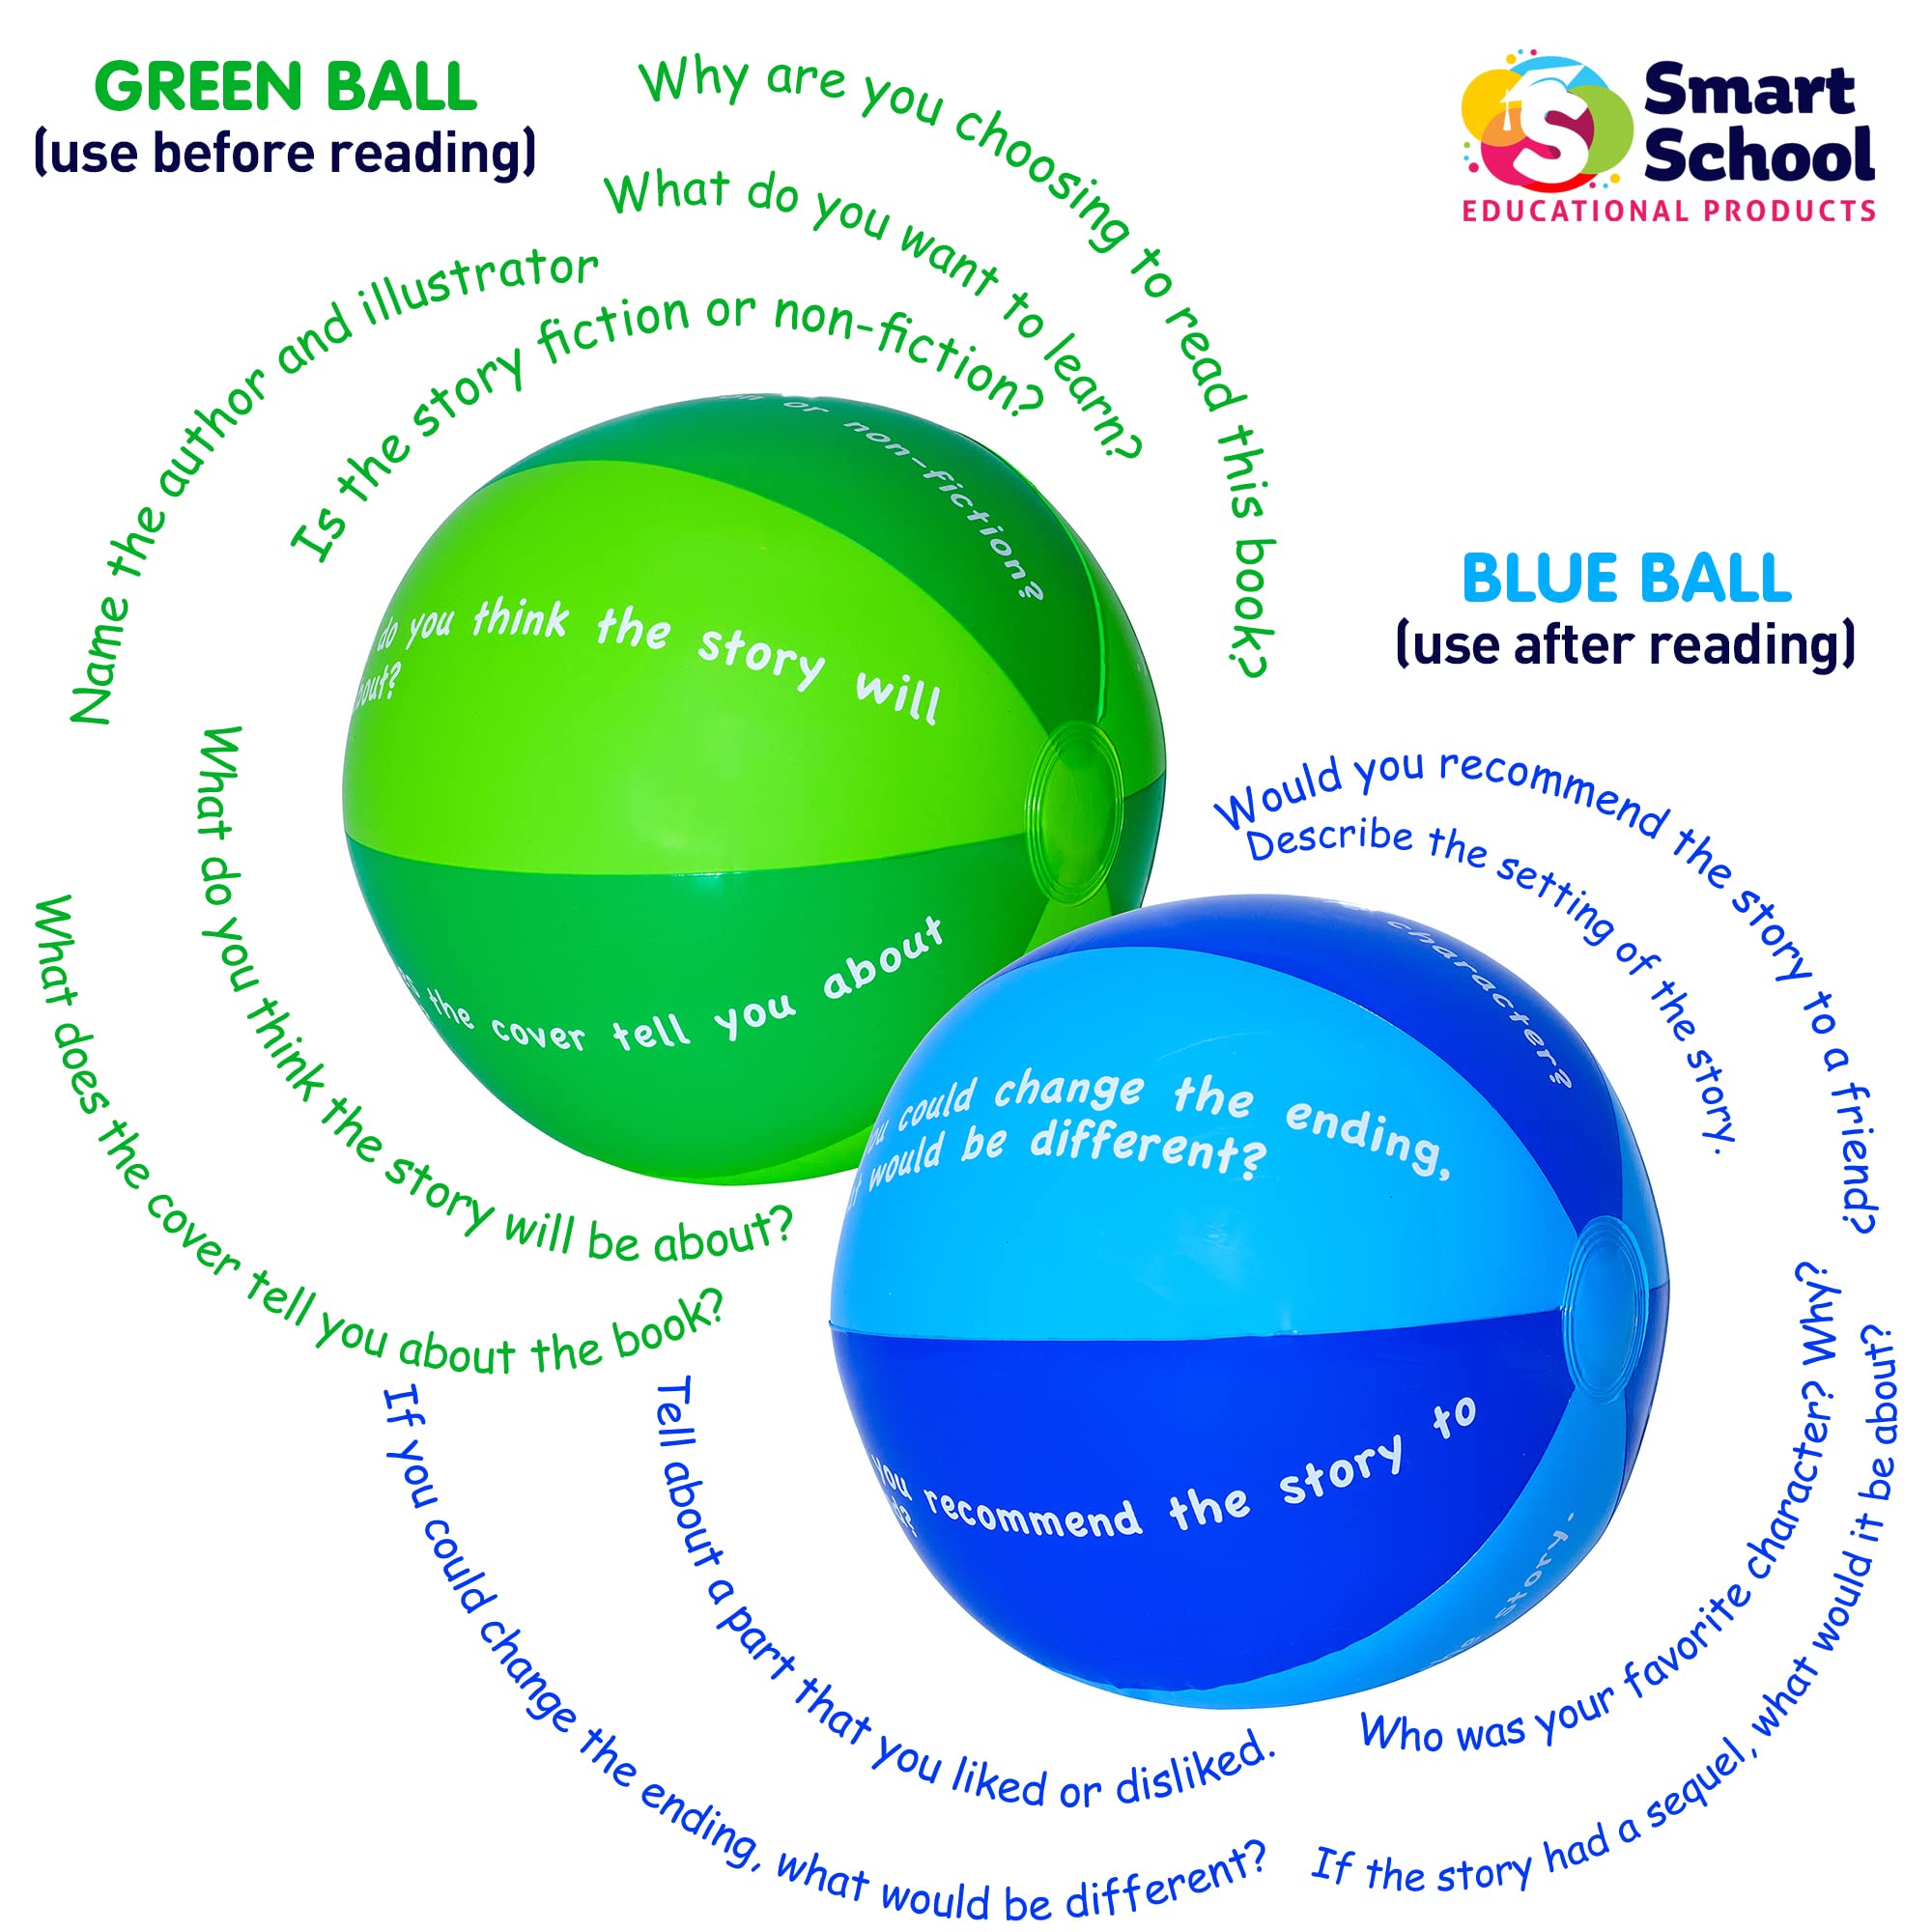 Smart School Educational Products Classroom Beach Ball Game, Conversation Starter or Reading Comprehension (Reading Comprehension)